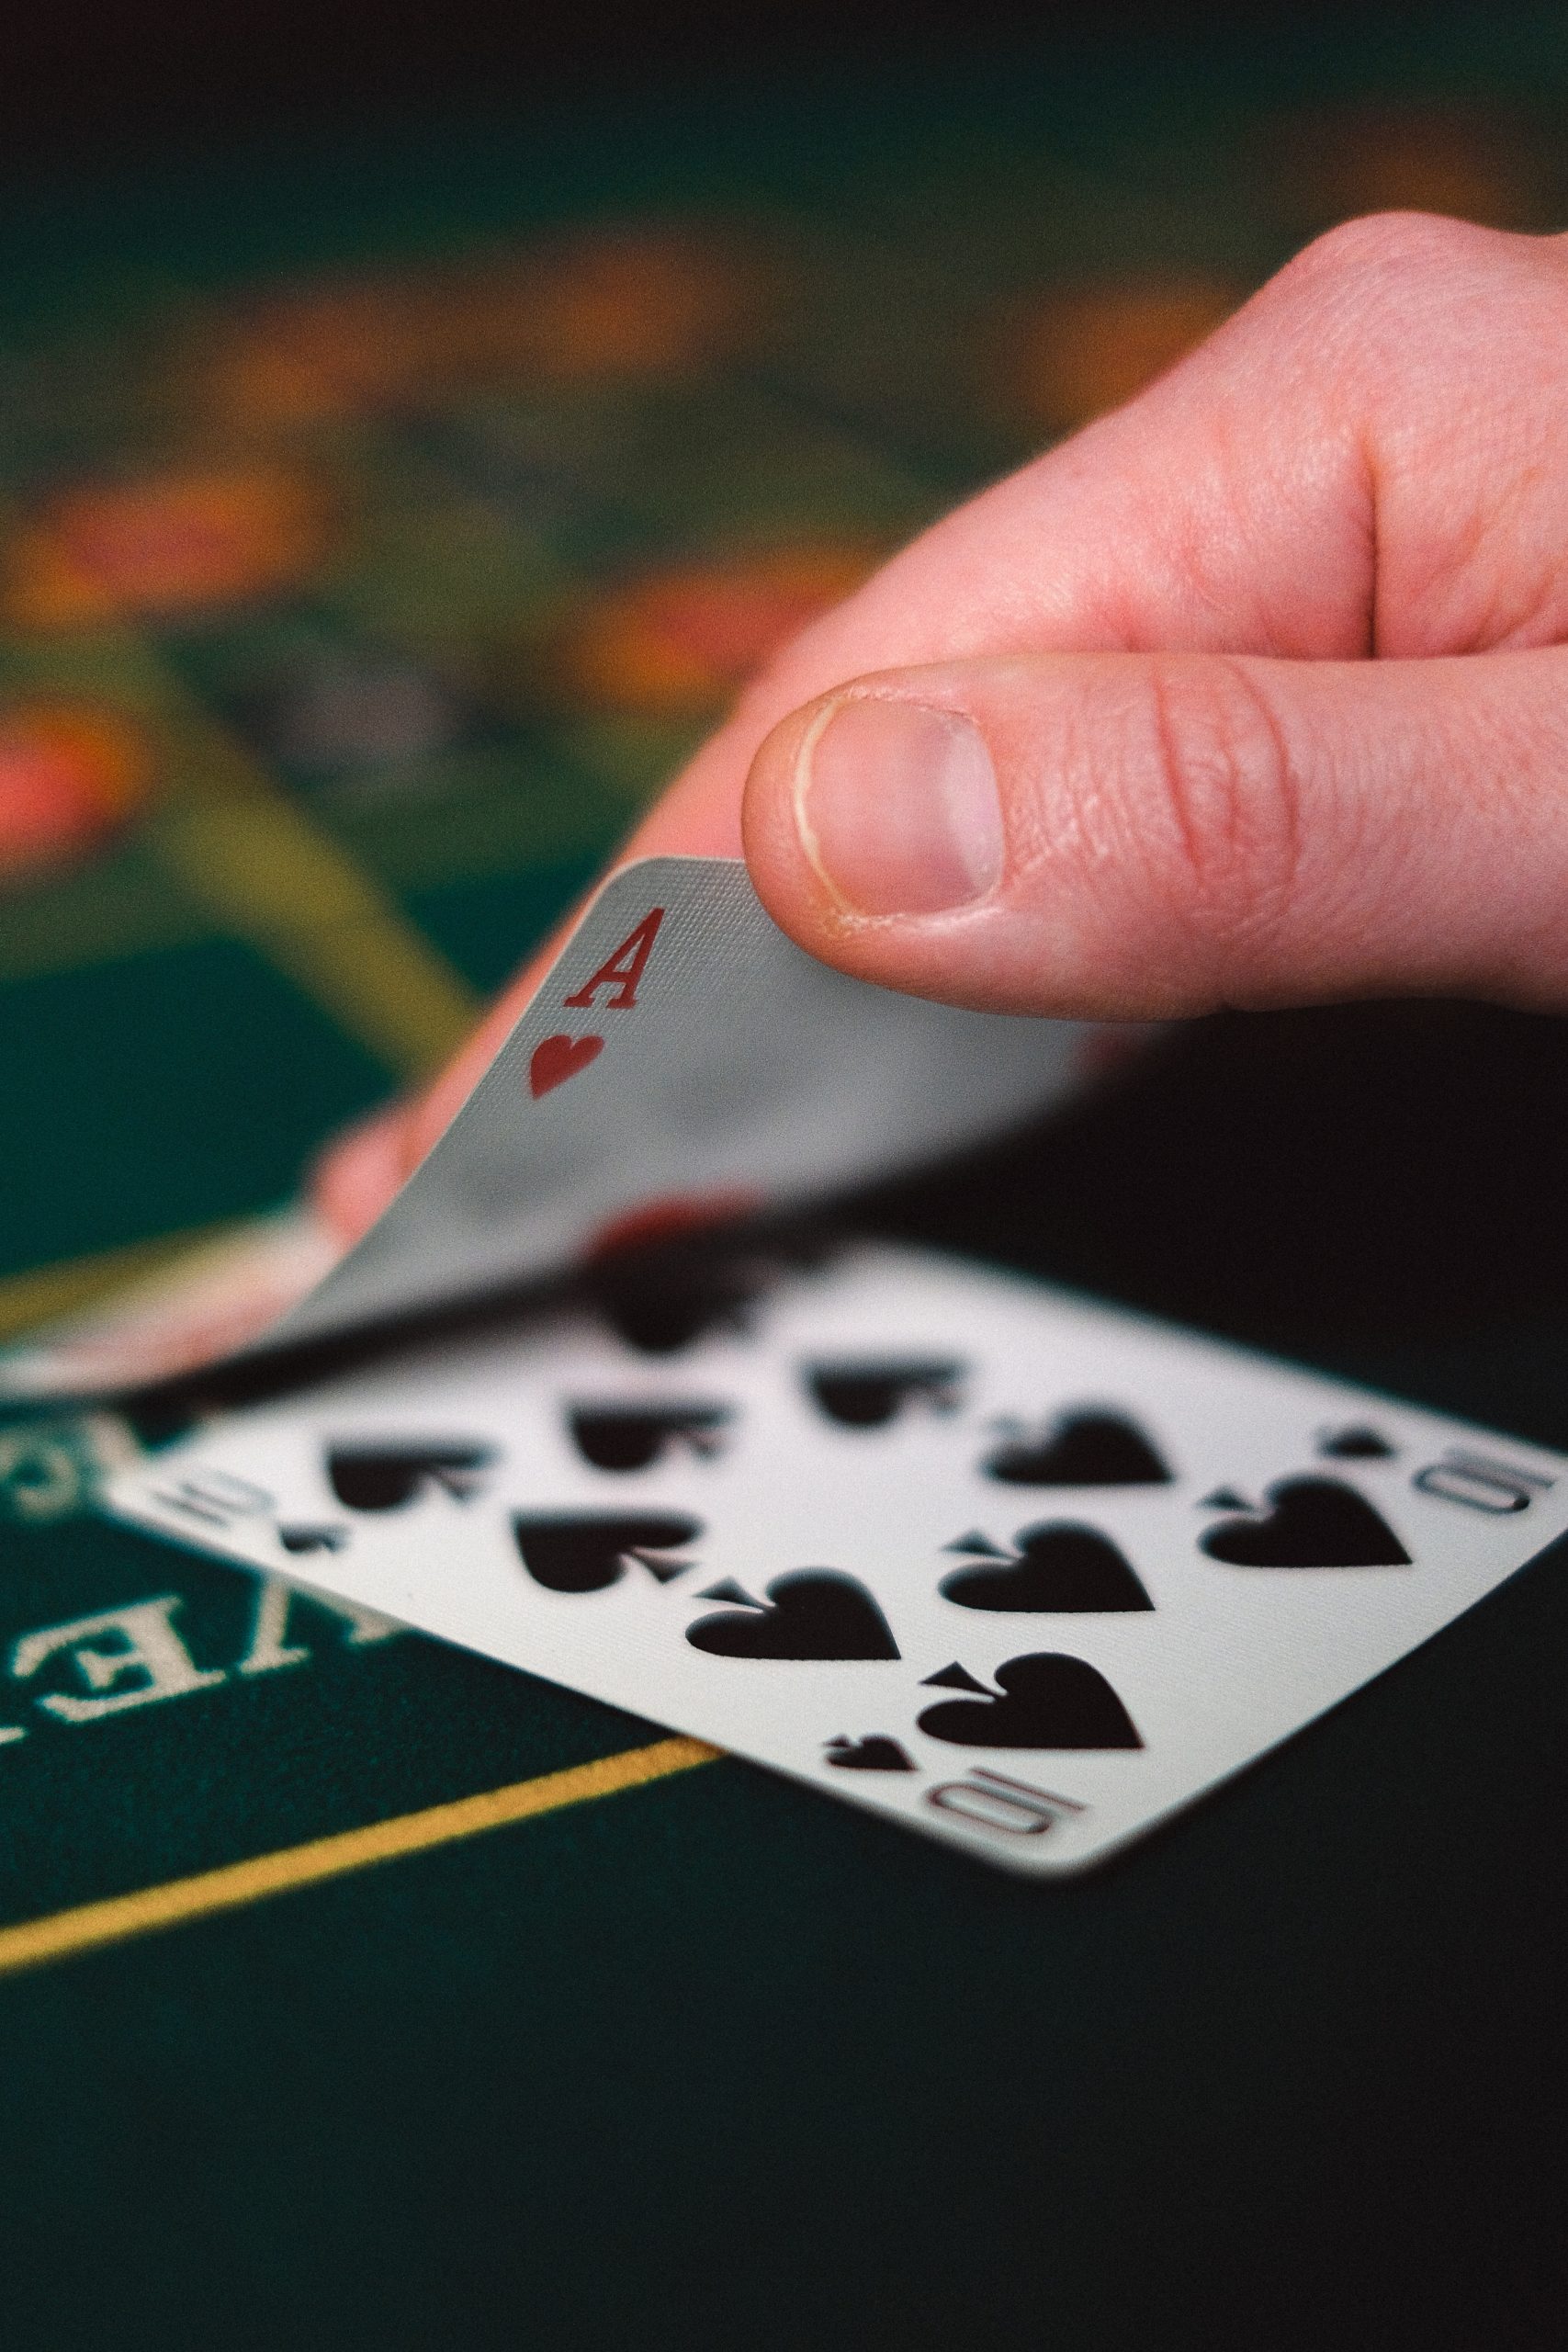 Bluffing and Betting Strategy: What Is a Blocker in Poker?